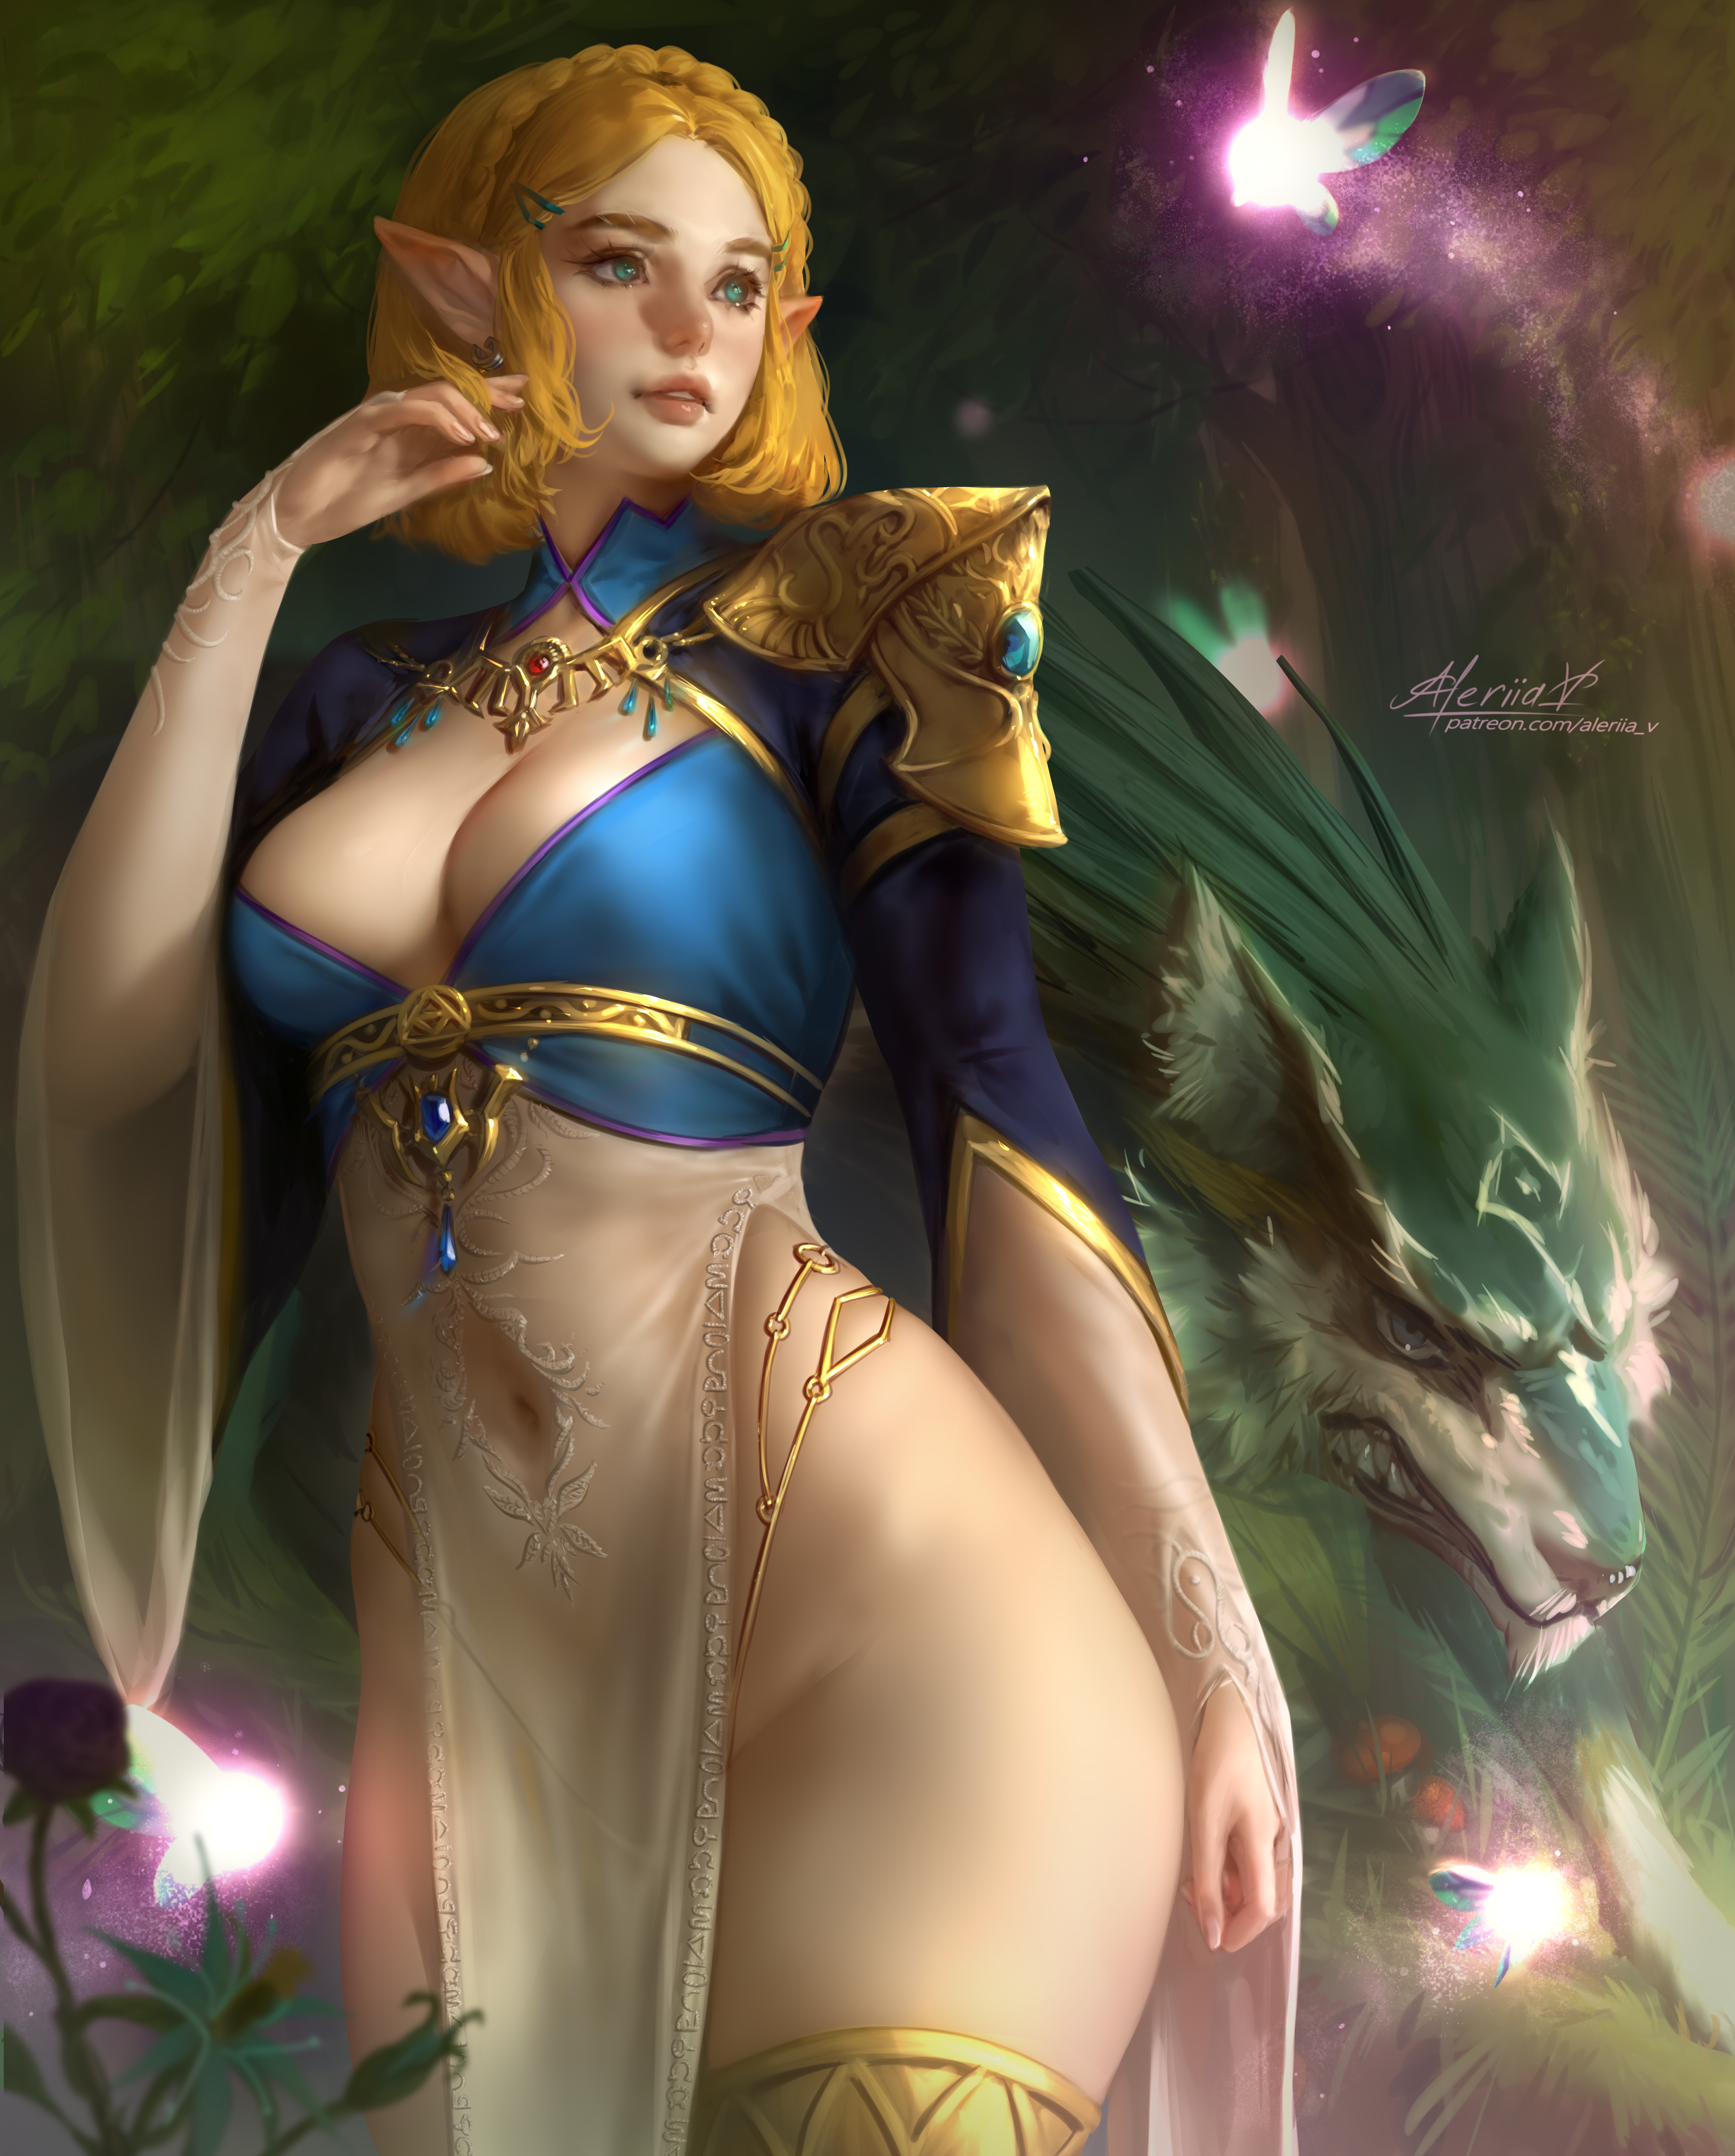 General 4024x5000 Zelda The Legend of Zelda video games video game girls Nintendo video game characters pointy ears artwork drawing fan art Lera Pi portrait display thighs blonde blue eyes wolf animals cleavage boobs